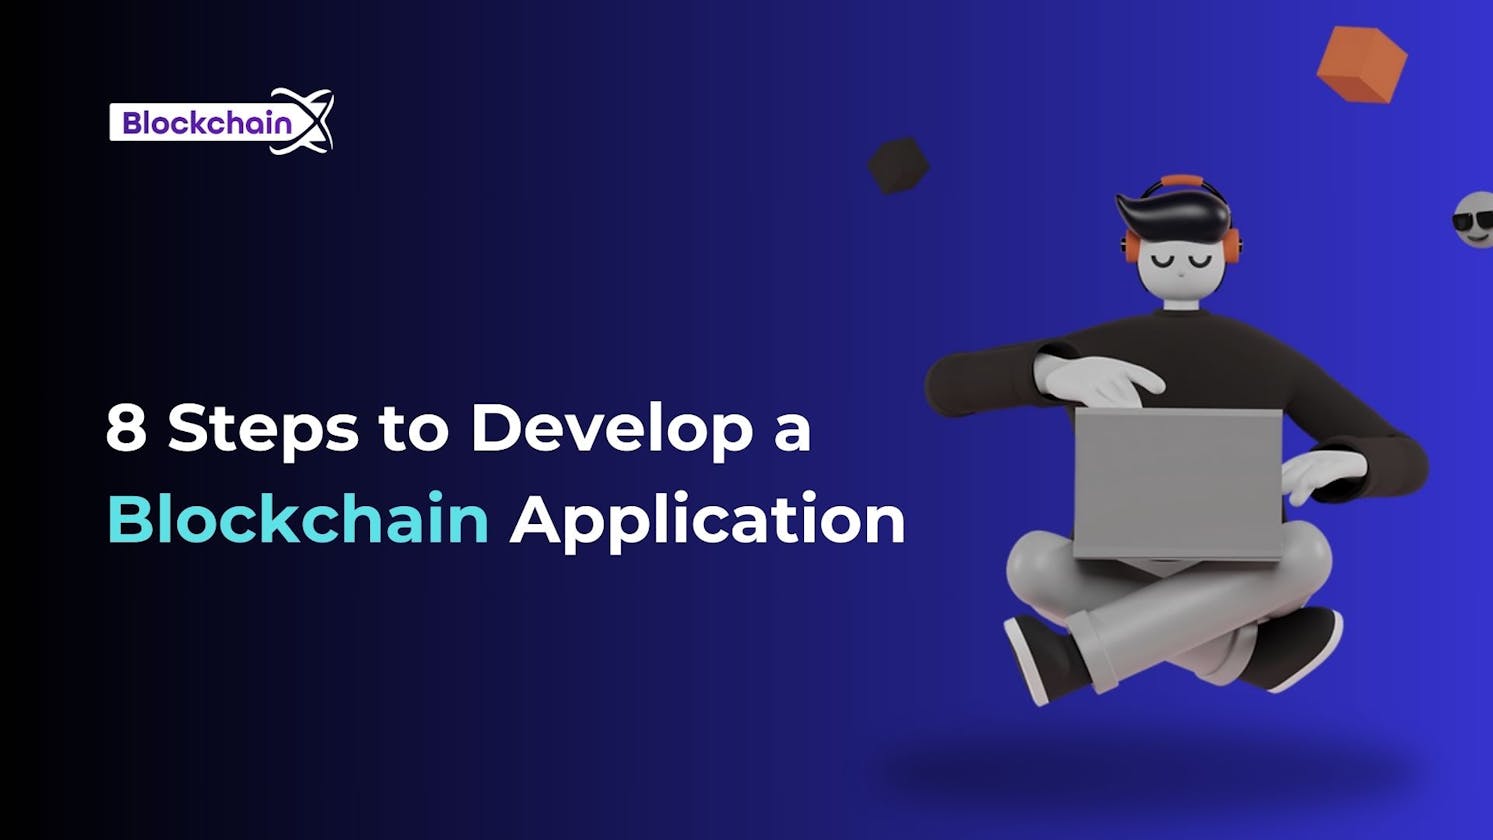 8 Steps to Develop a Blockchain Application